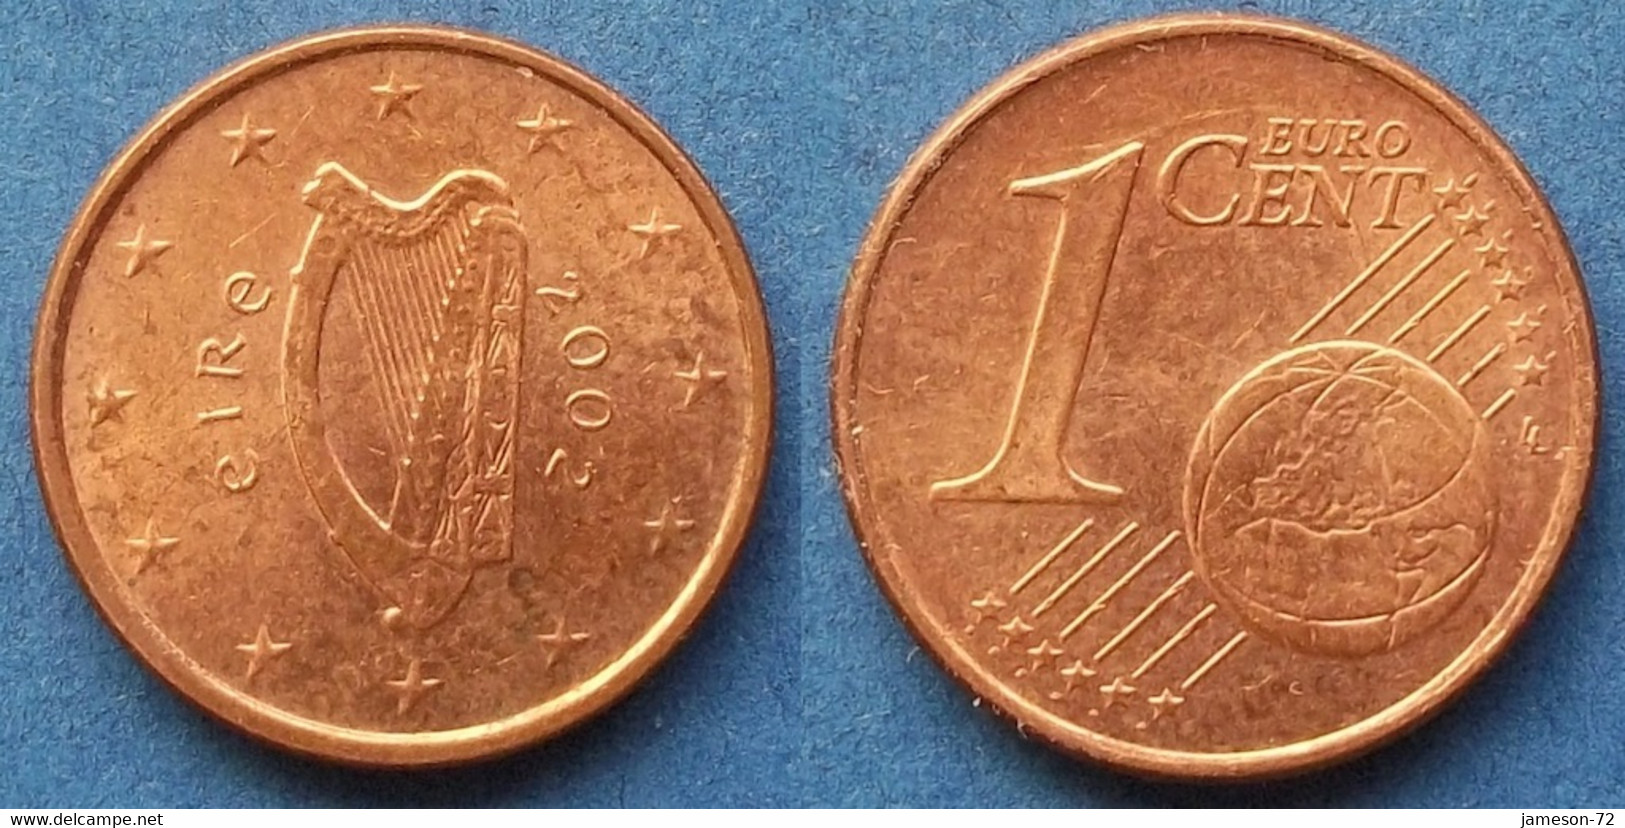 IRELAND - 1 Euro Cent 2002 KM# 32 Euro Coinage (2002) - Edelweiss Coins - Ierland